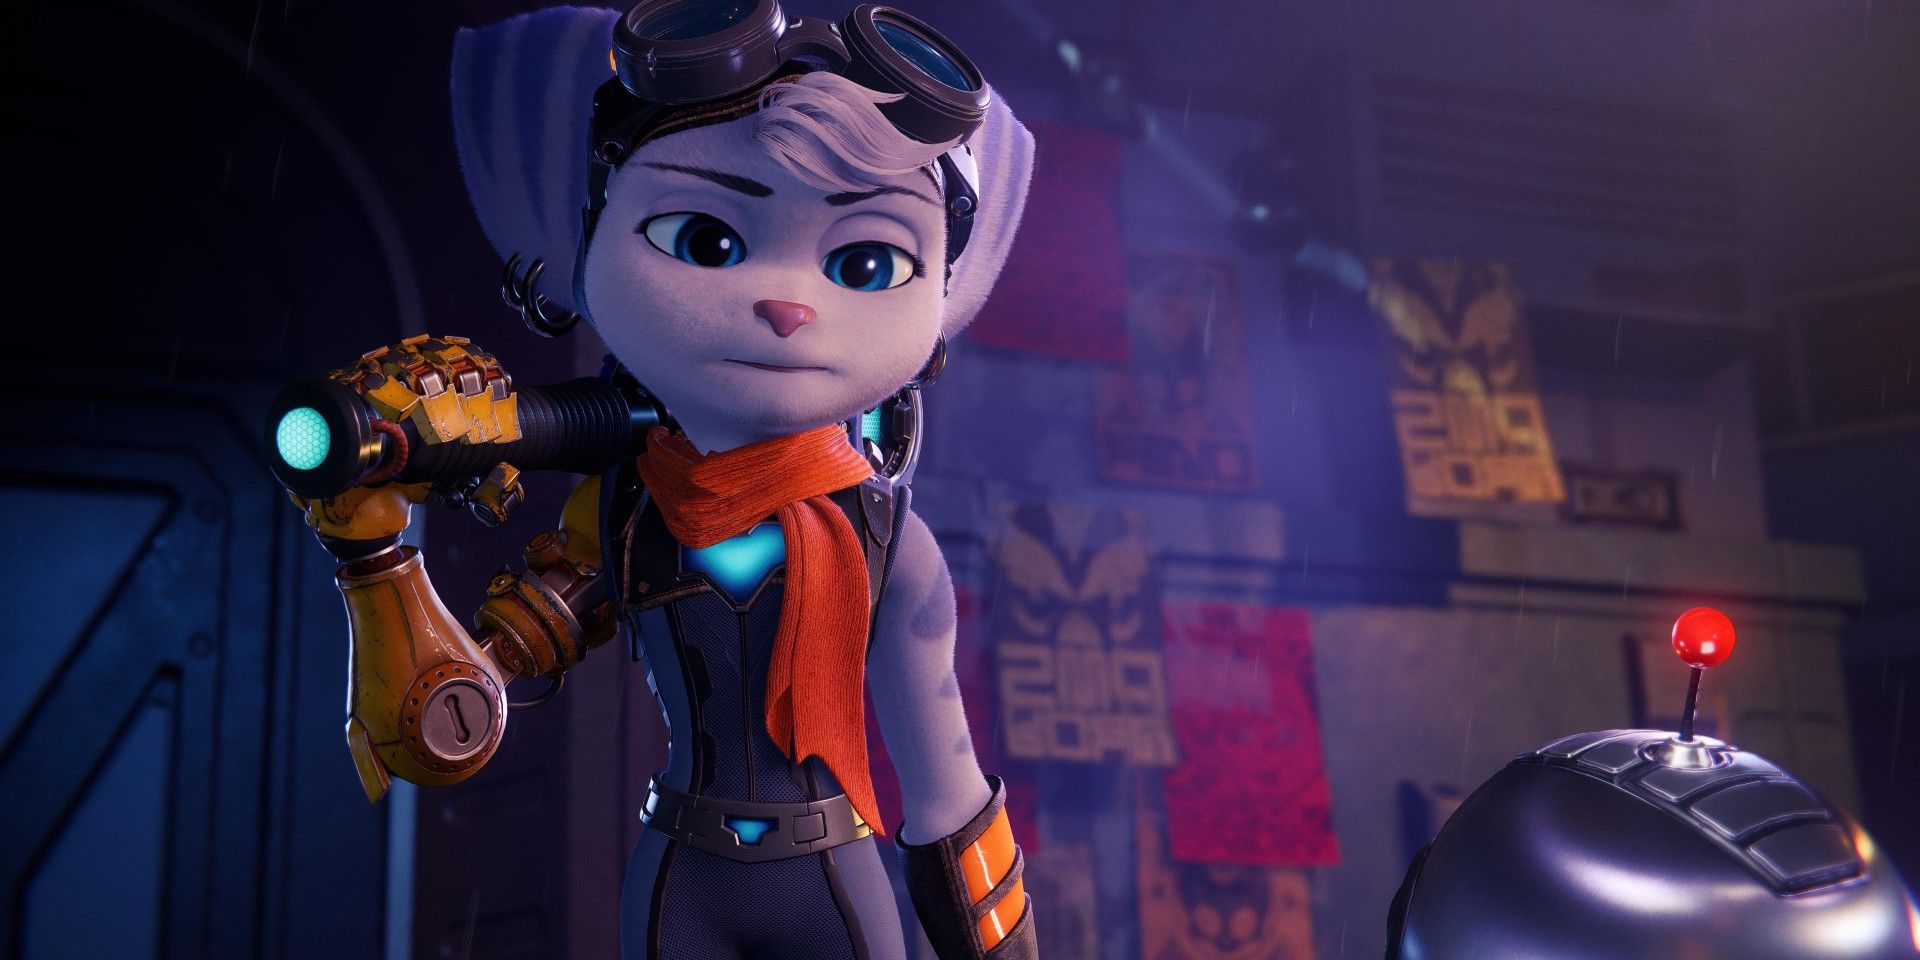 How Ratchet & Clank's Rivet Was Saved From Being Oversexualized